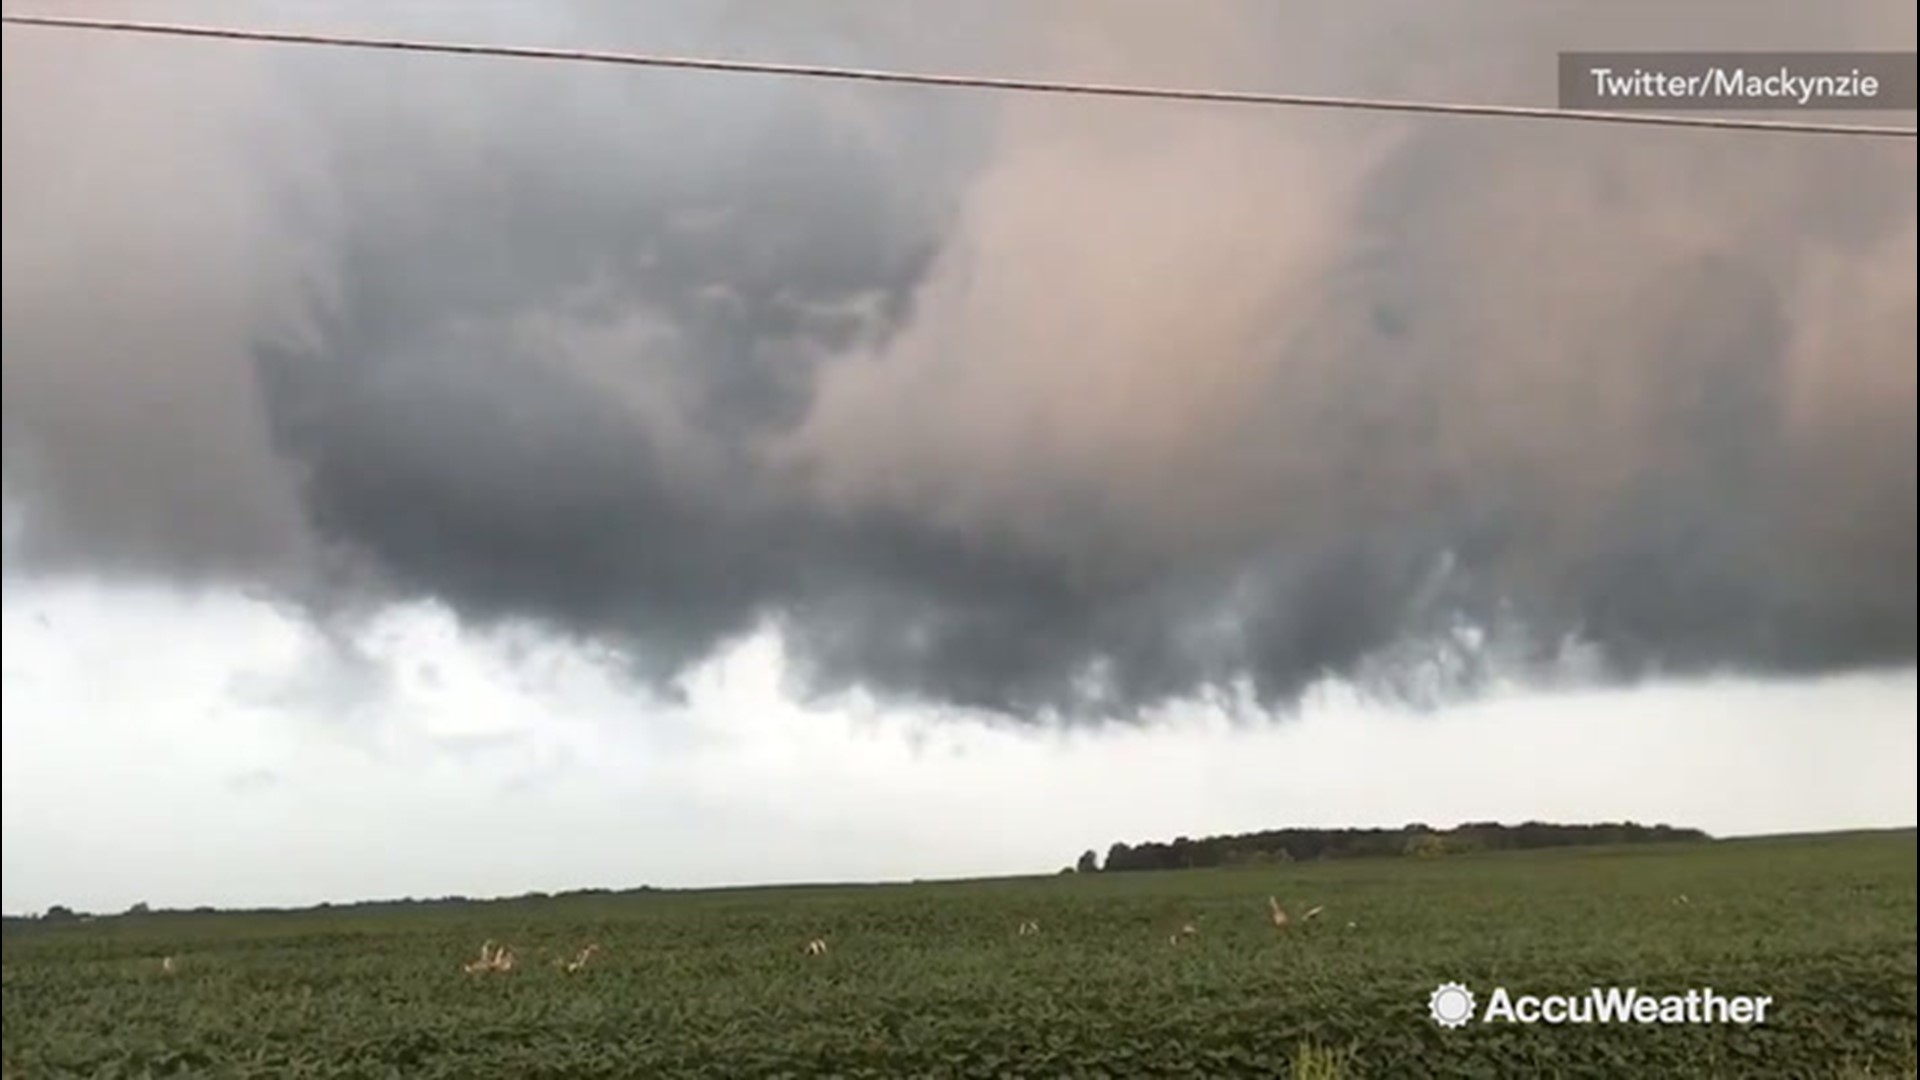 These dark storm clouds were spotted with rotation visible just north of Mahomet and west of Champaign, Illinois, on Aug. 20.